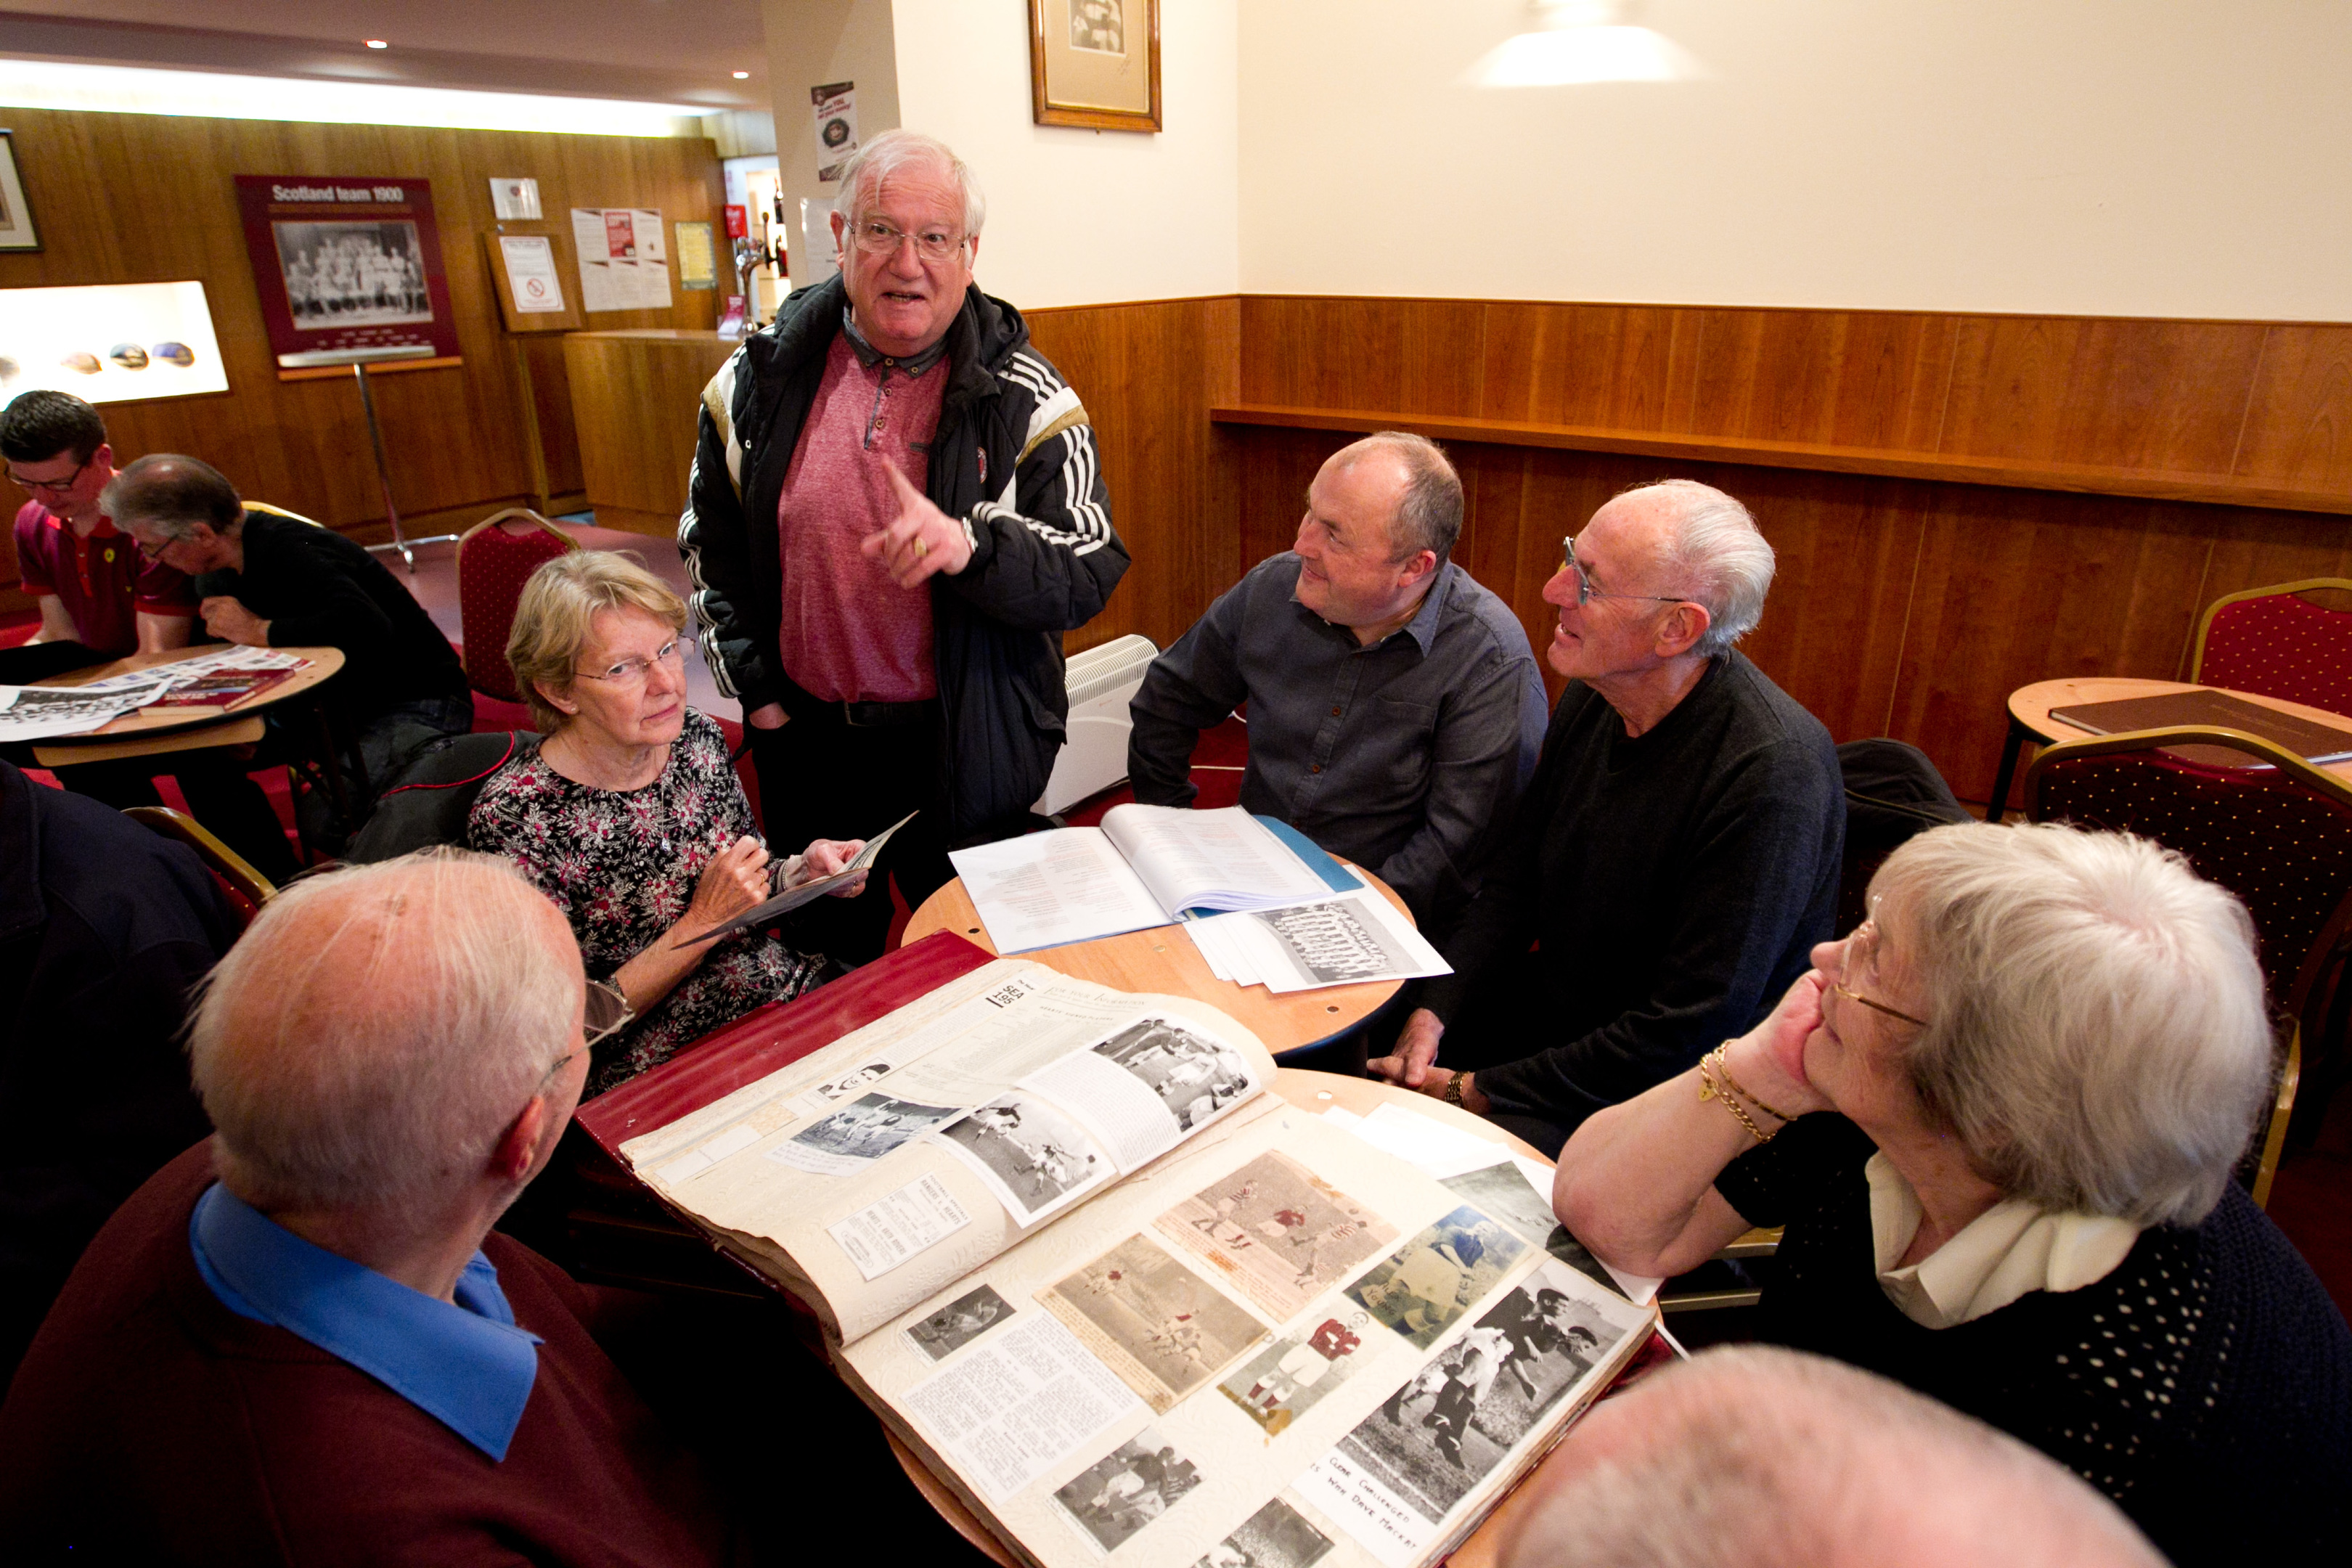 People affected by dementia attending a Hearts Football Memories meeting at Tynecastle stadium (Andrew Cawley/DC Thomson)